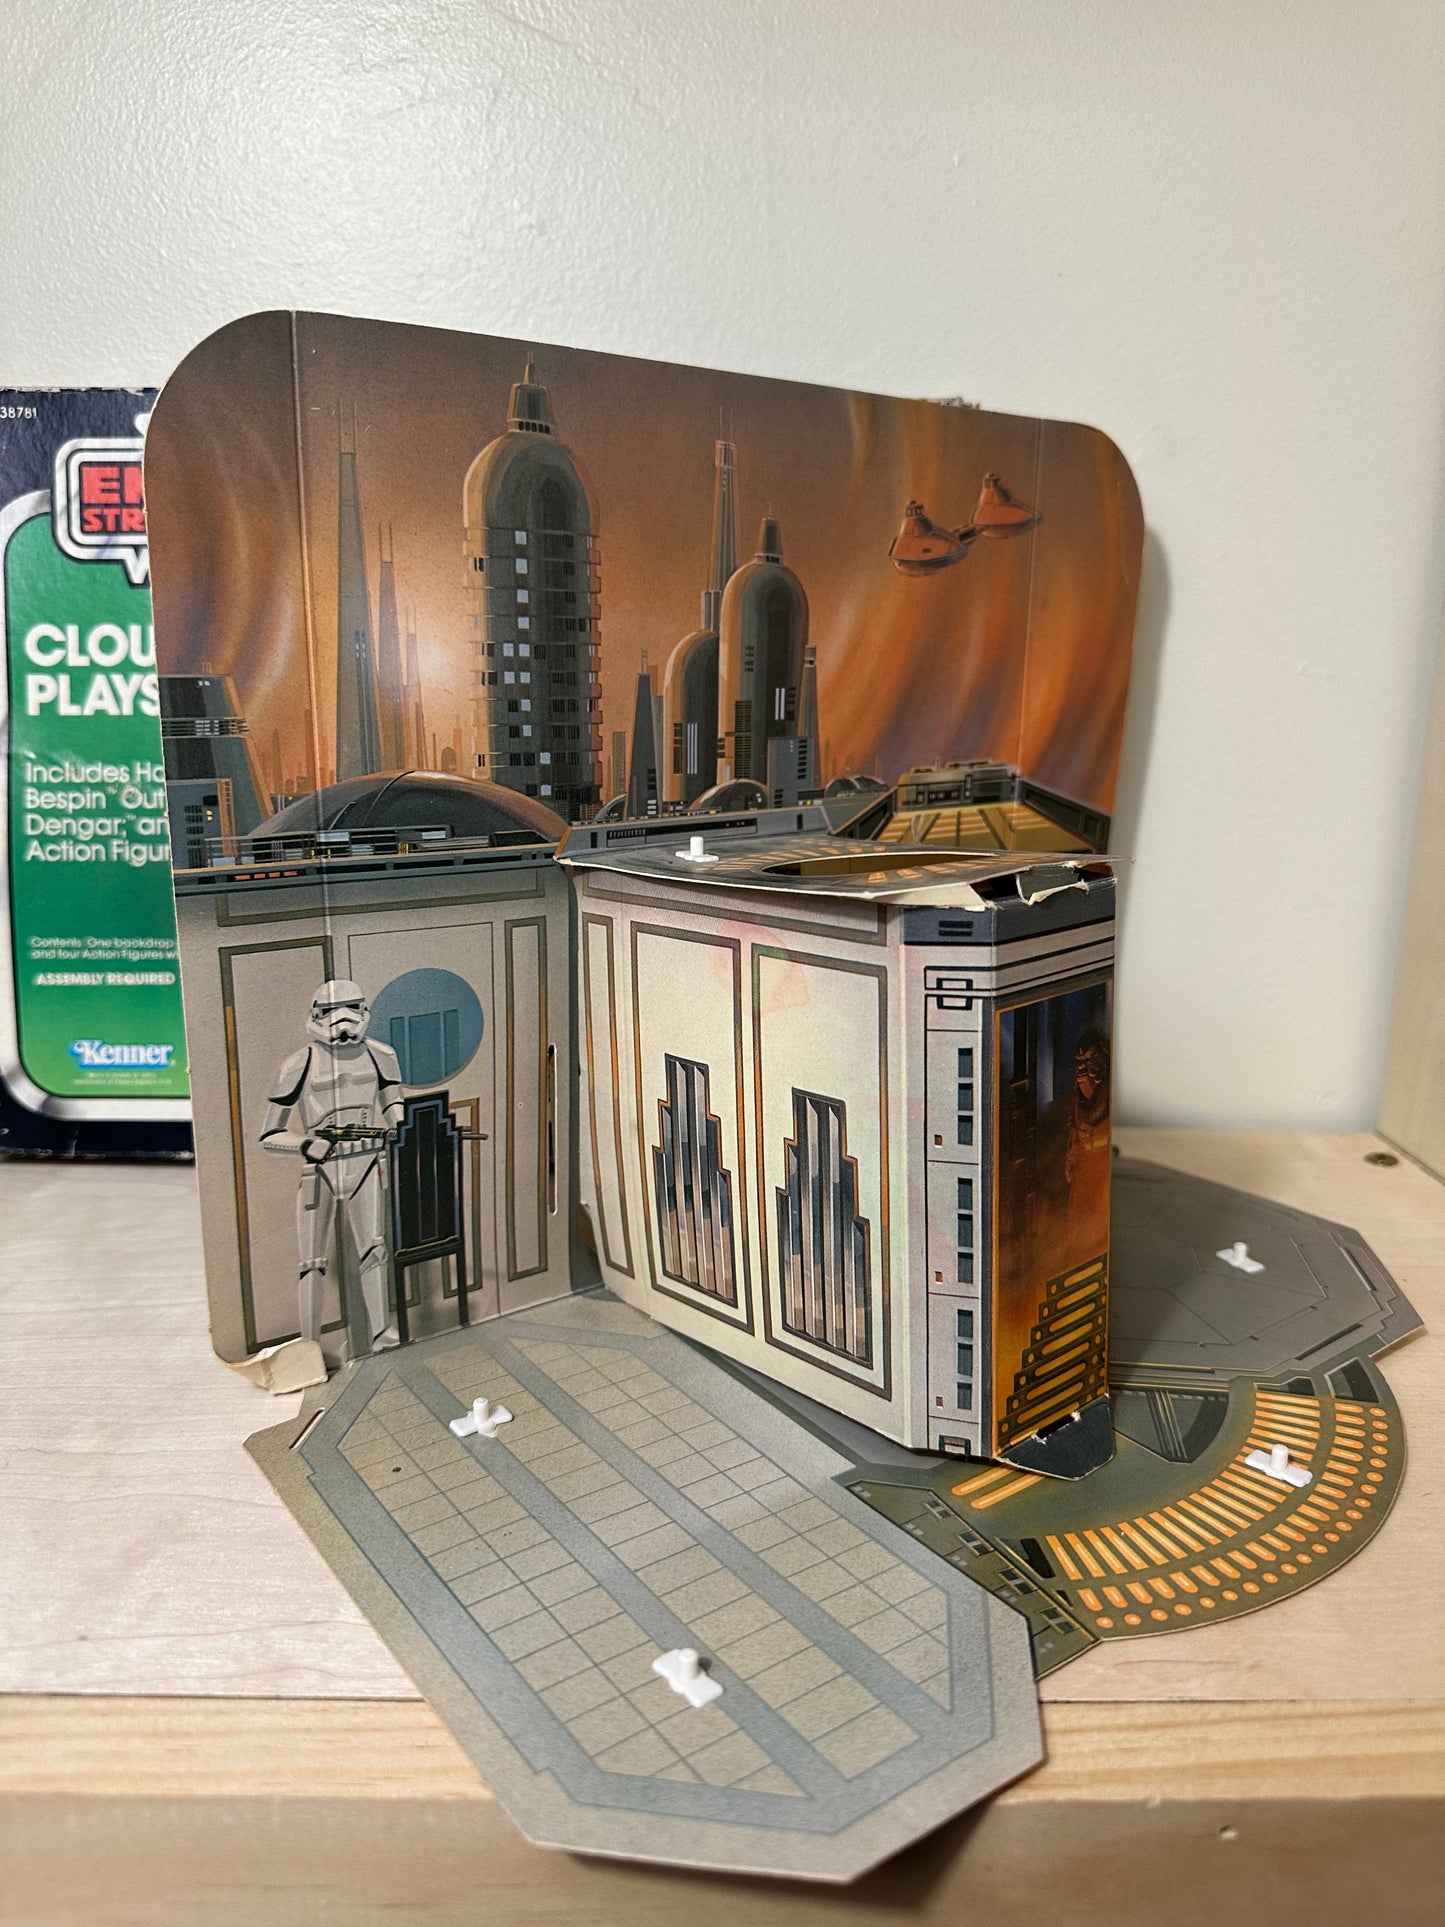 1980 Star Wars Cloud City Empire Strikes Back ESB Playset with original Box and Action Figures